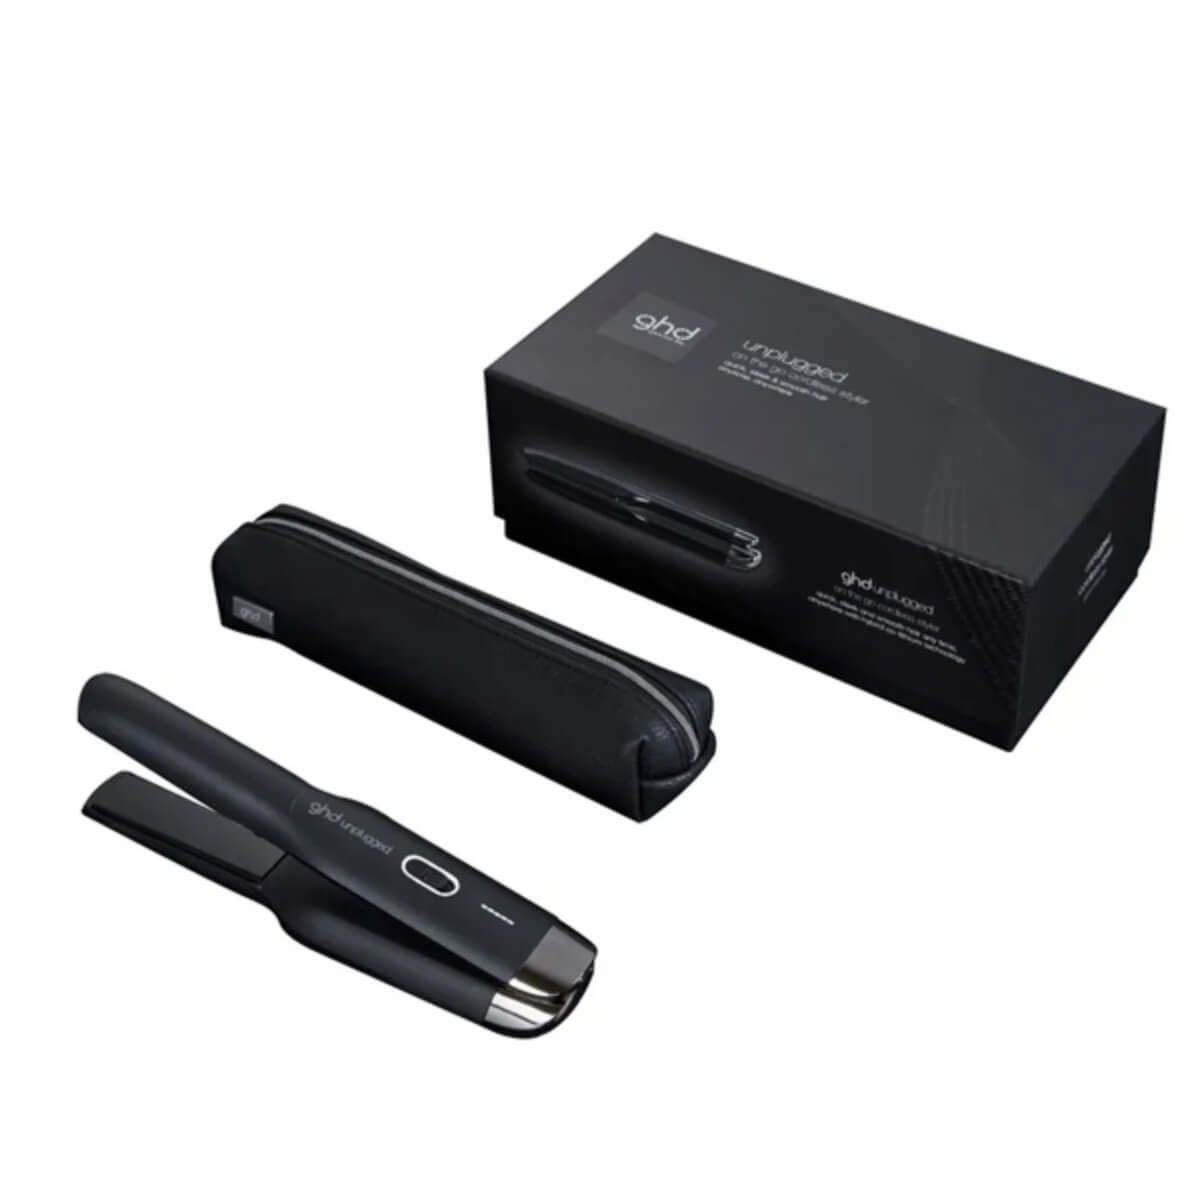 GHD UNPLUGGED CORDLESS STYLER GISELLE BLACK